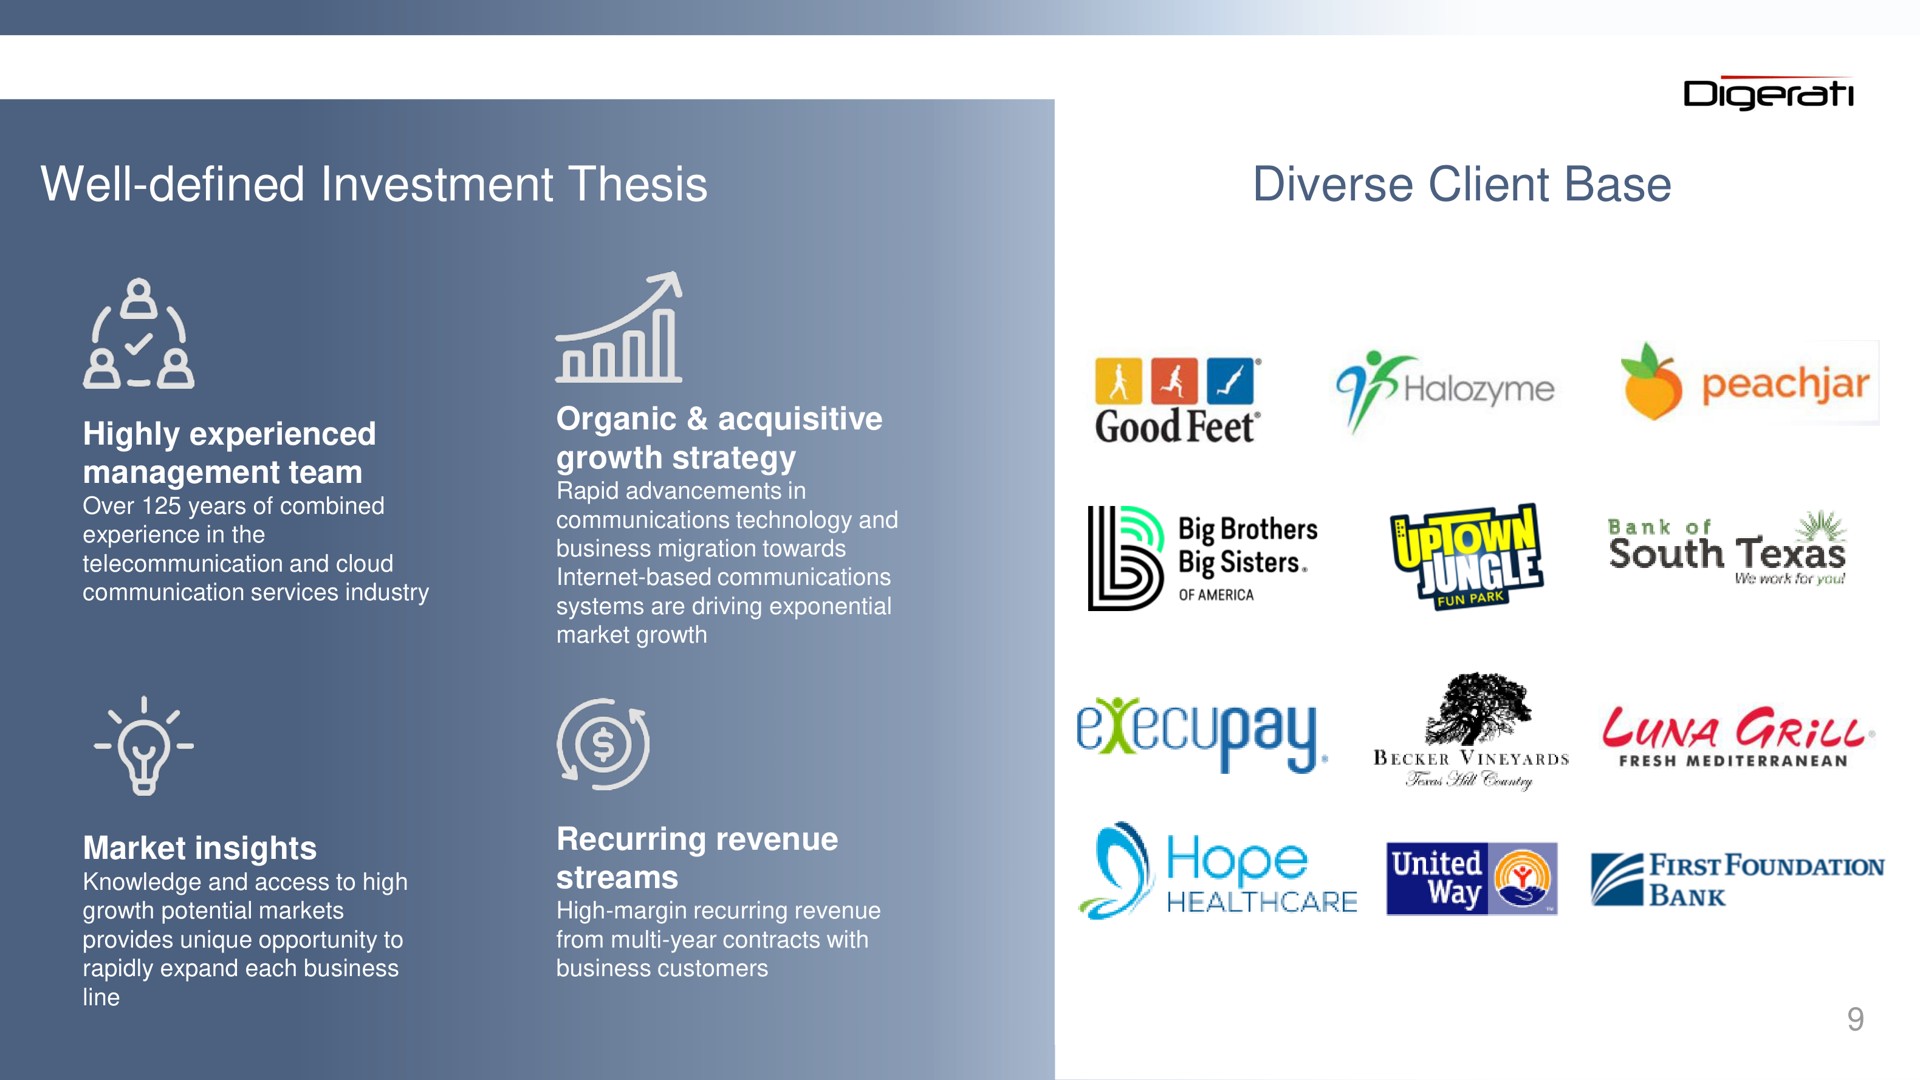 well defined investment thesis diverse client base good feet south luna grill | Digerati